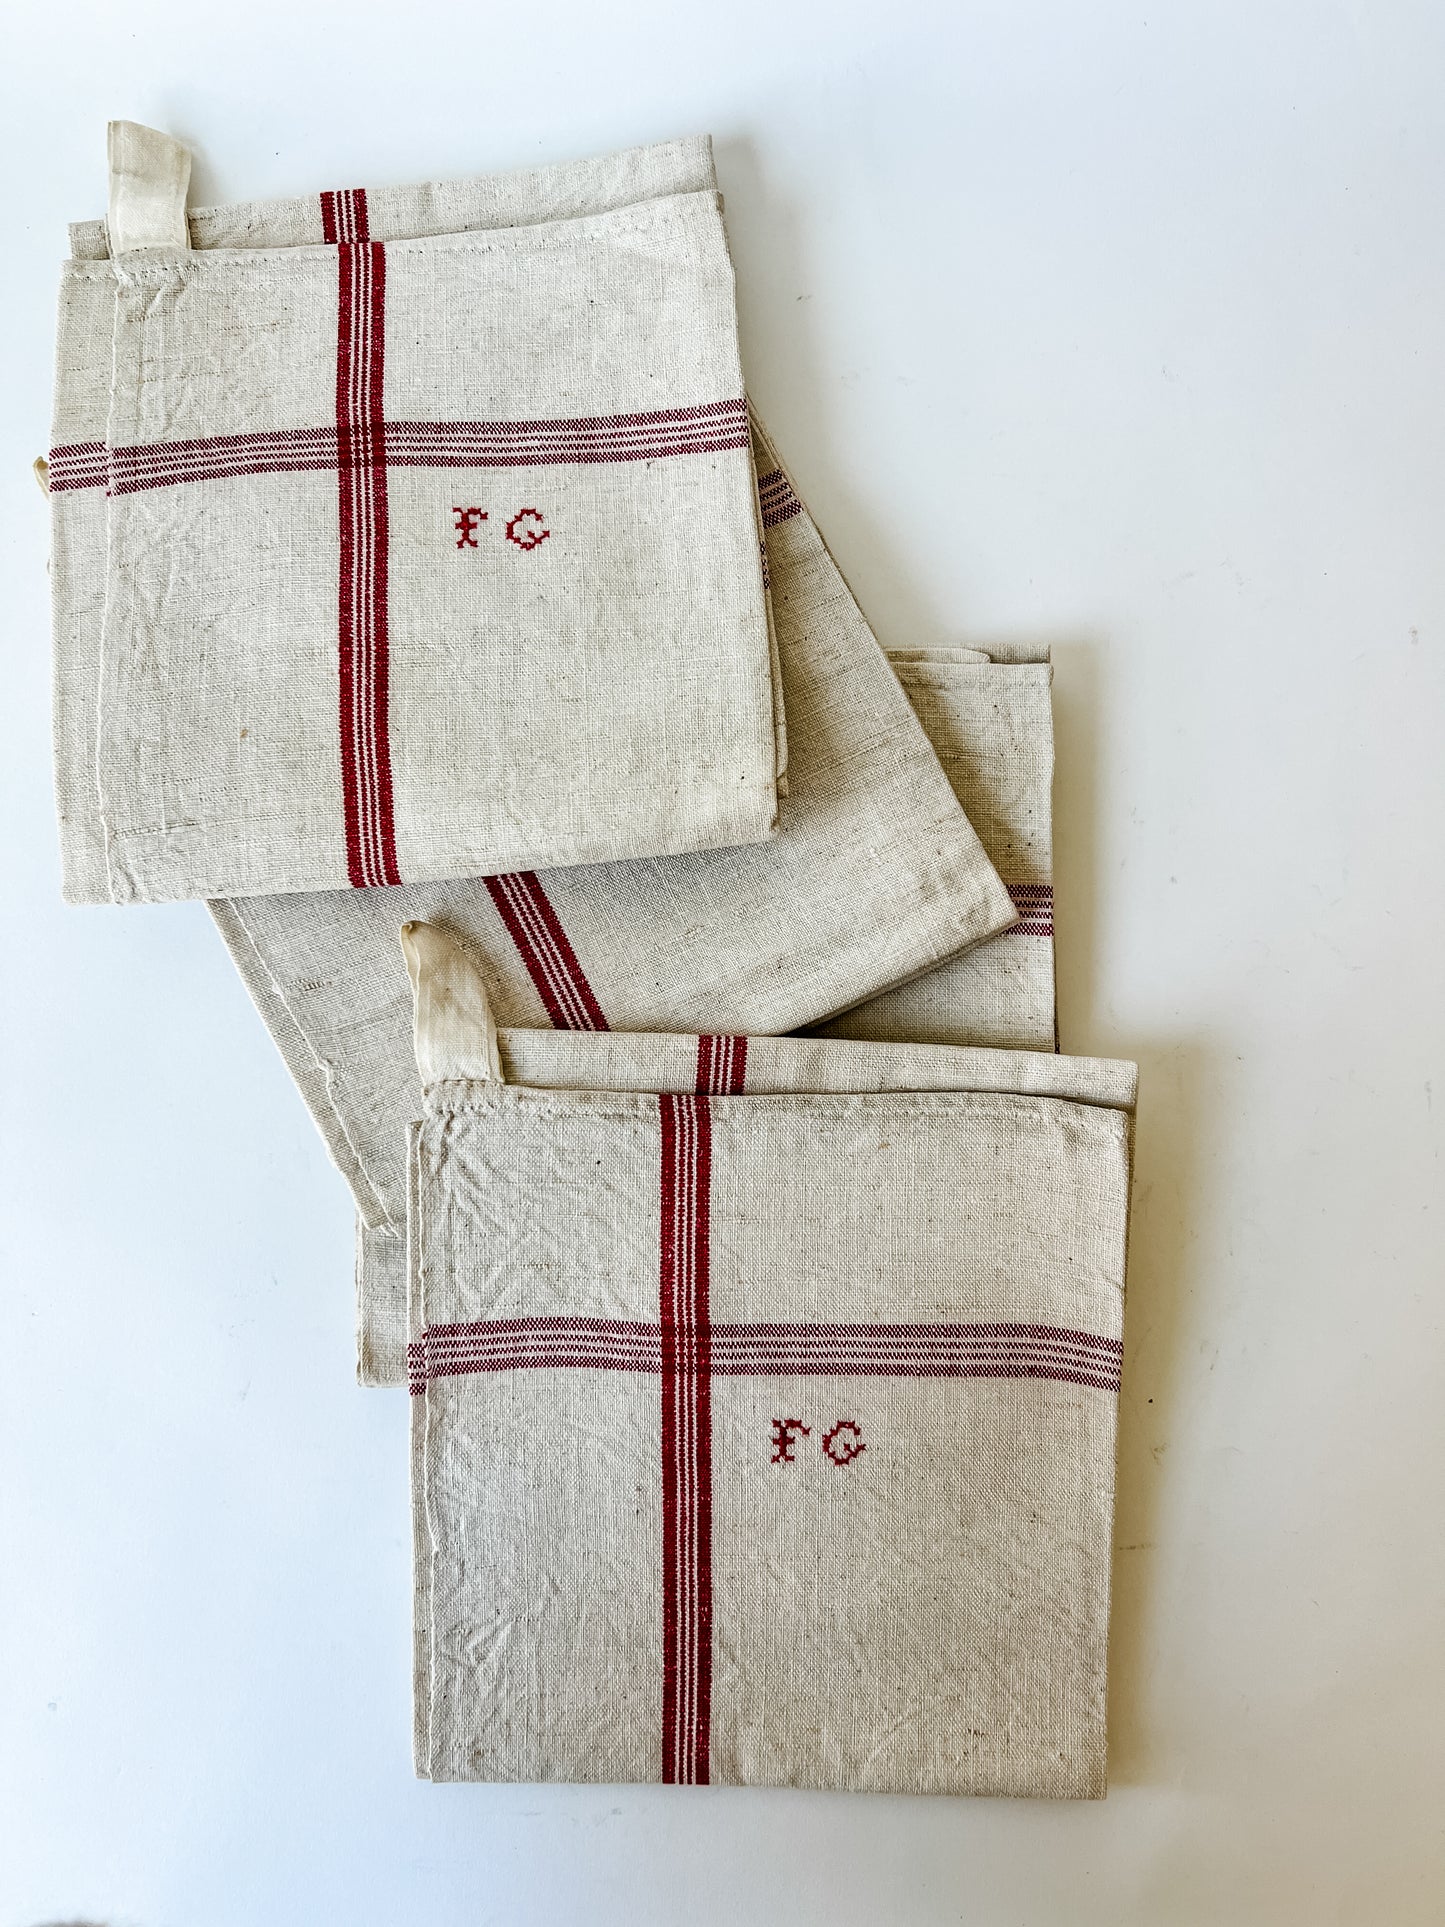 Vintage French Tea Towels (red plaid and natural)